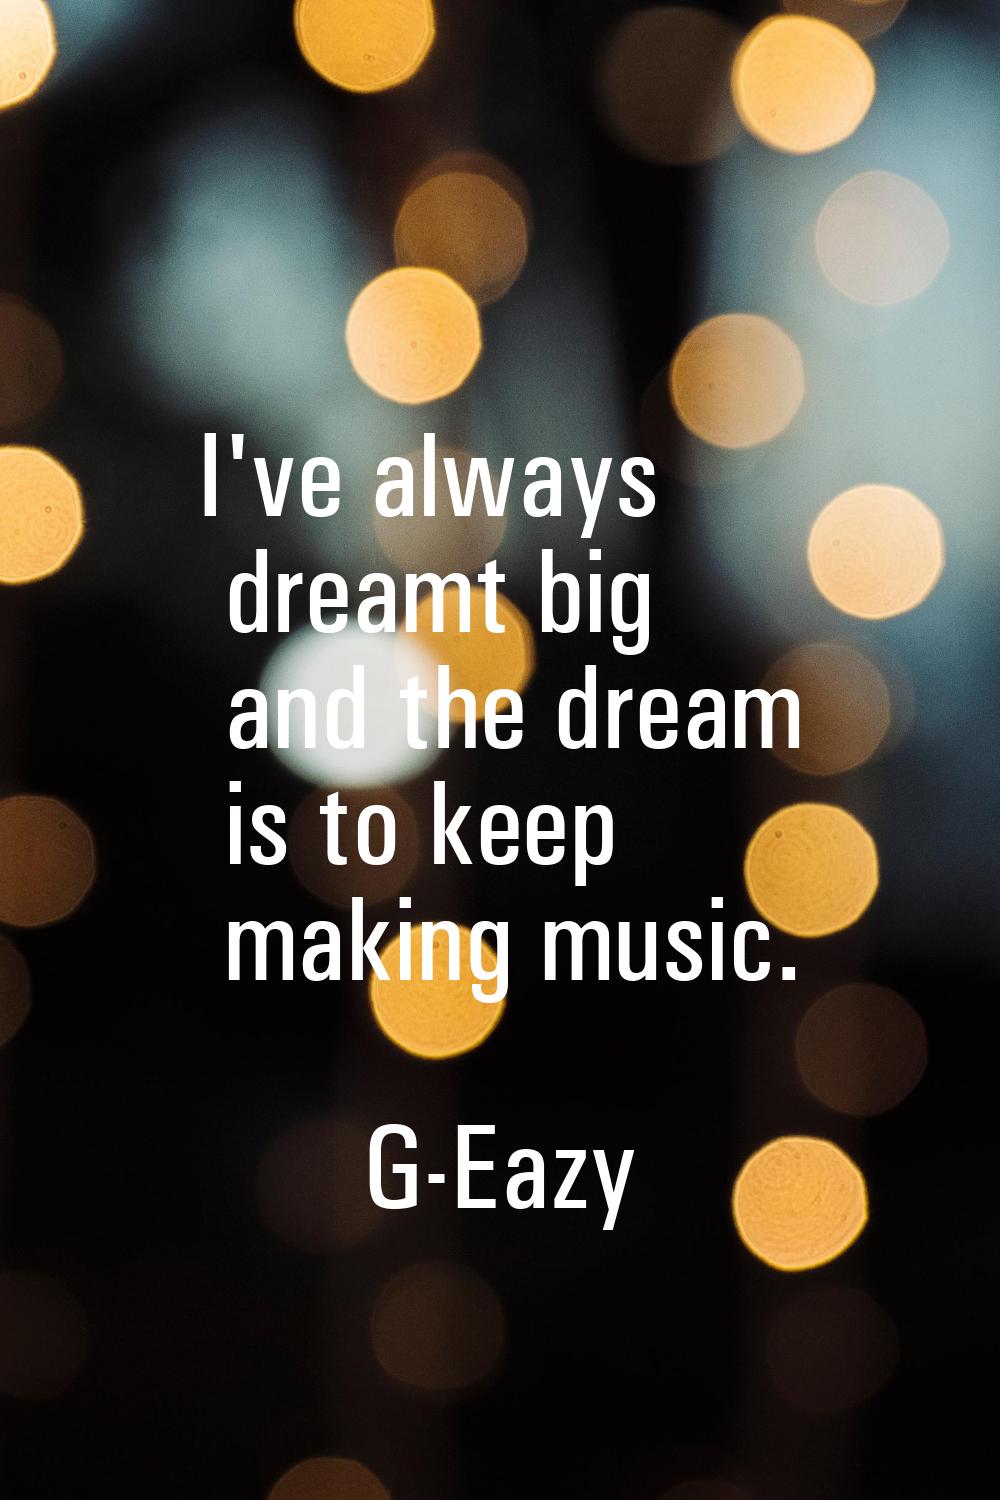 I've always dreamt big and the dream is to keep making music.